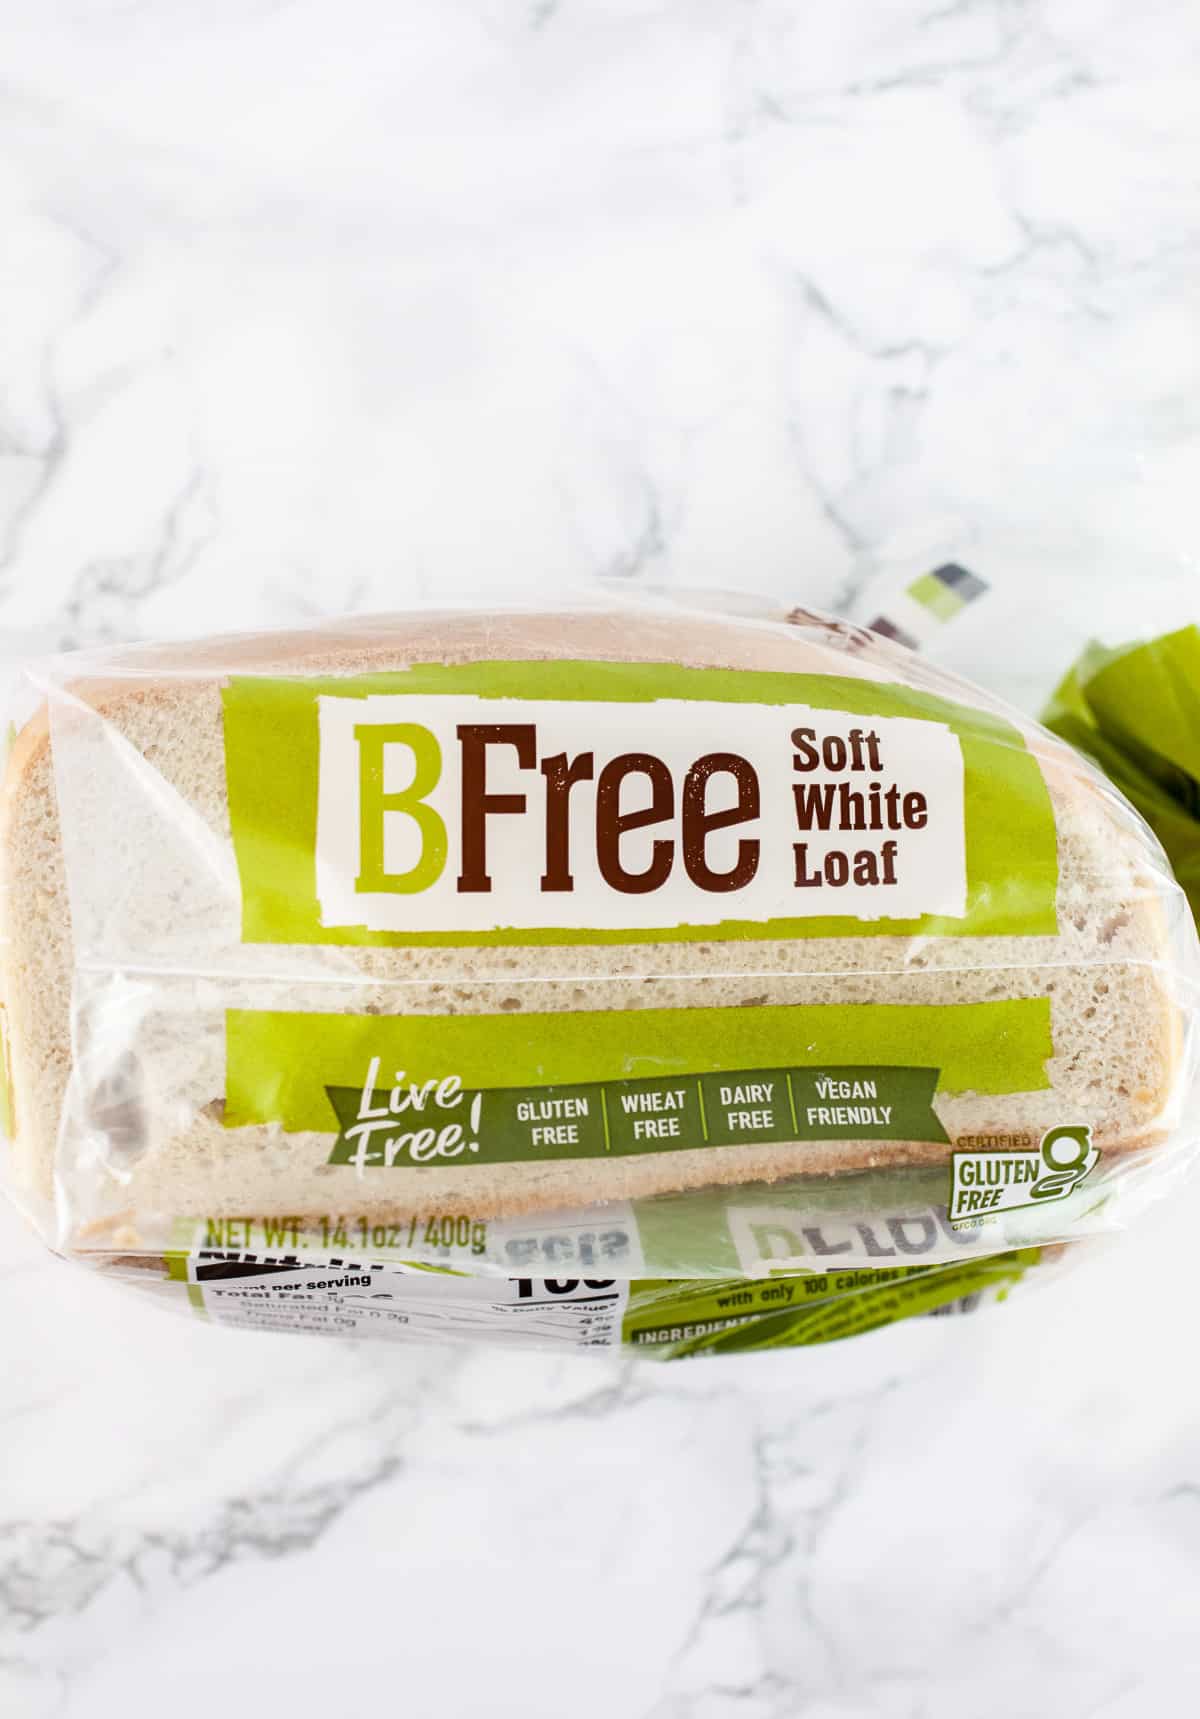 Package of gluten free bread on white surface.